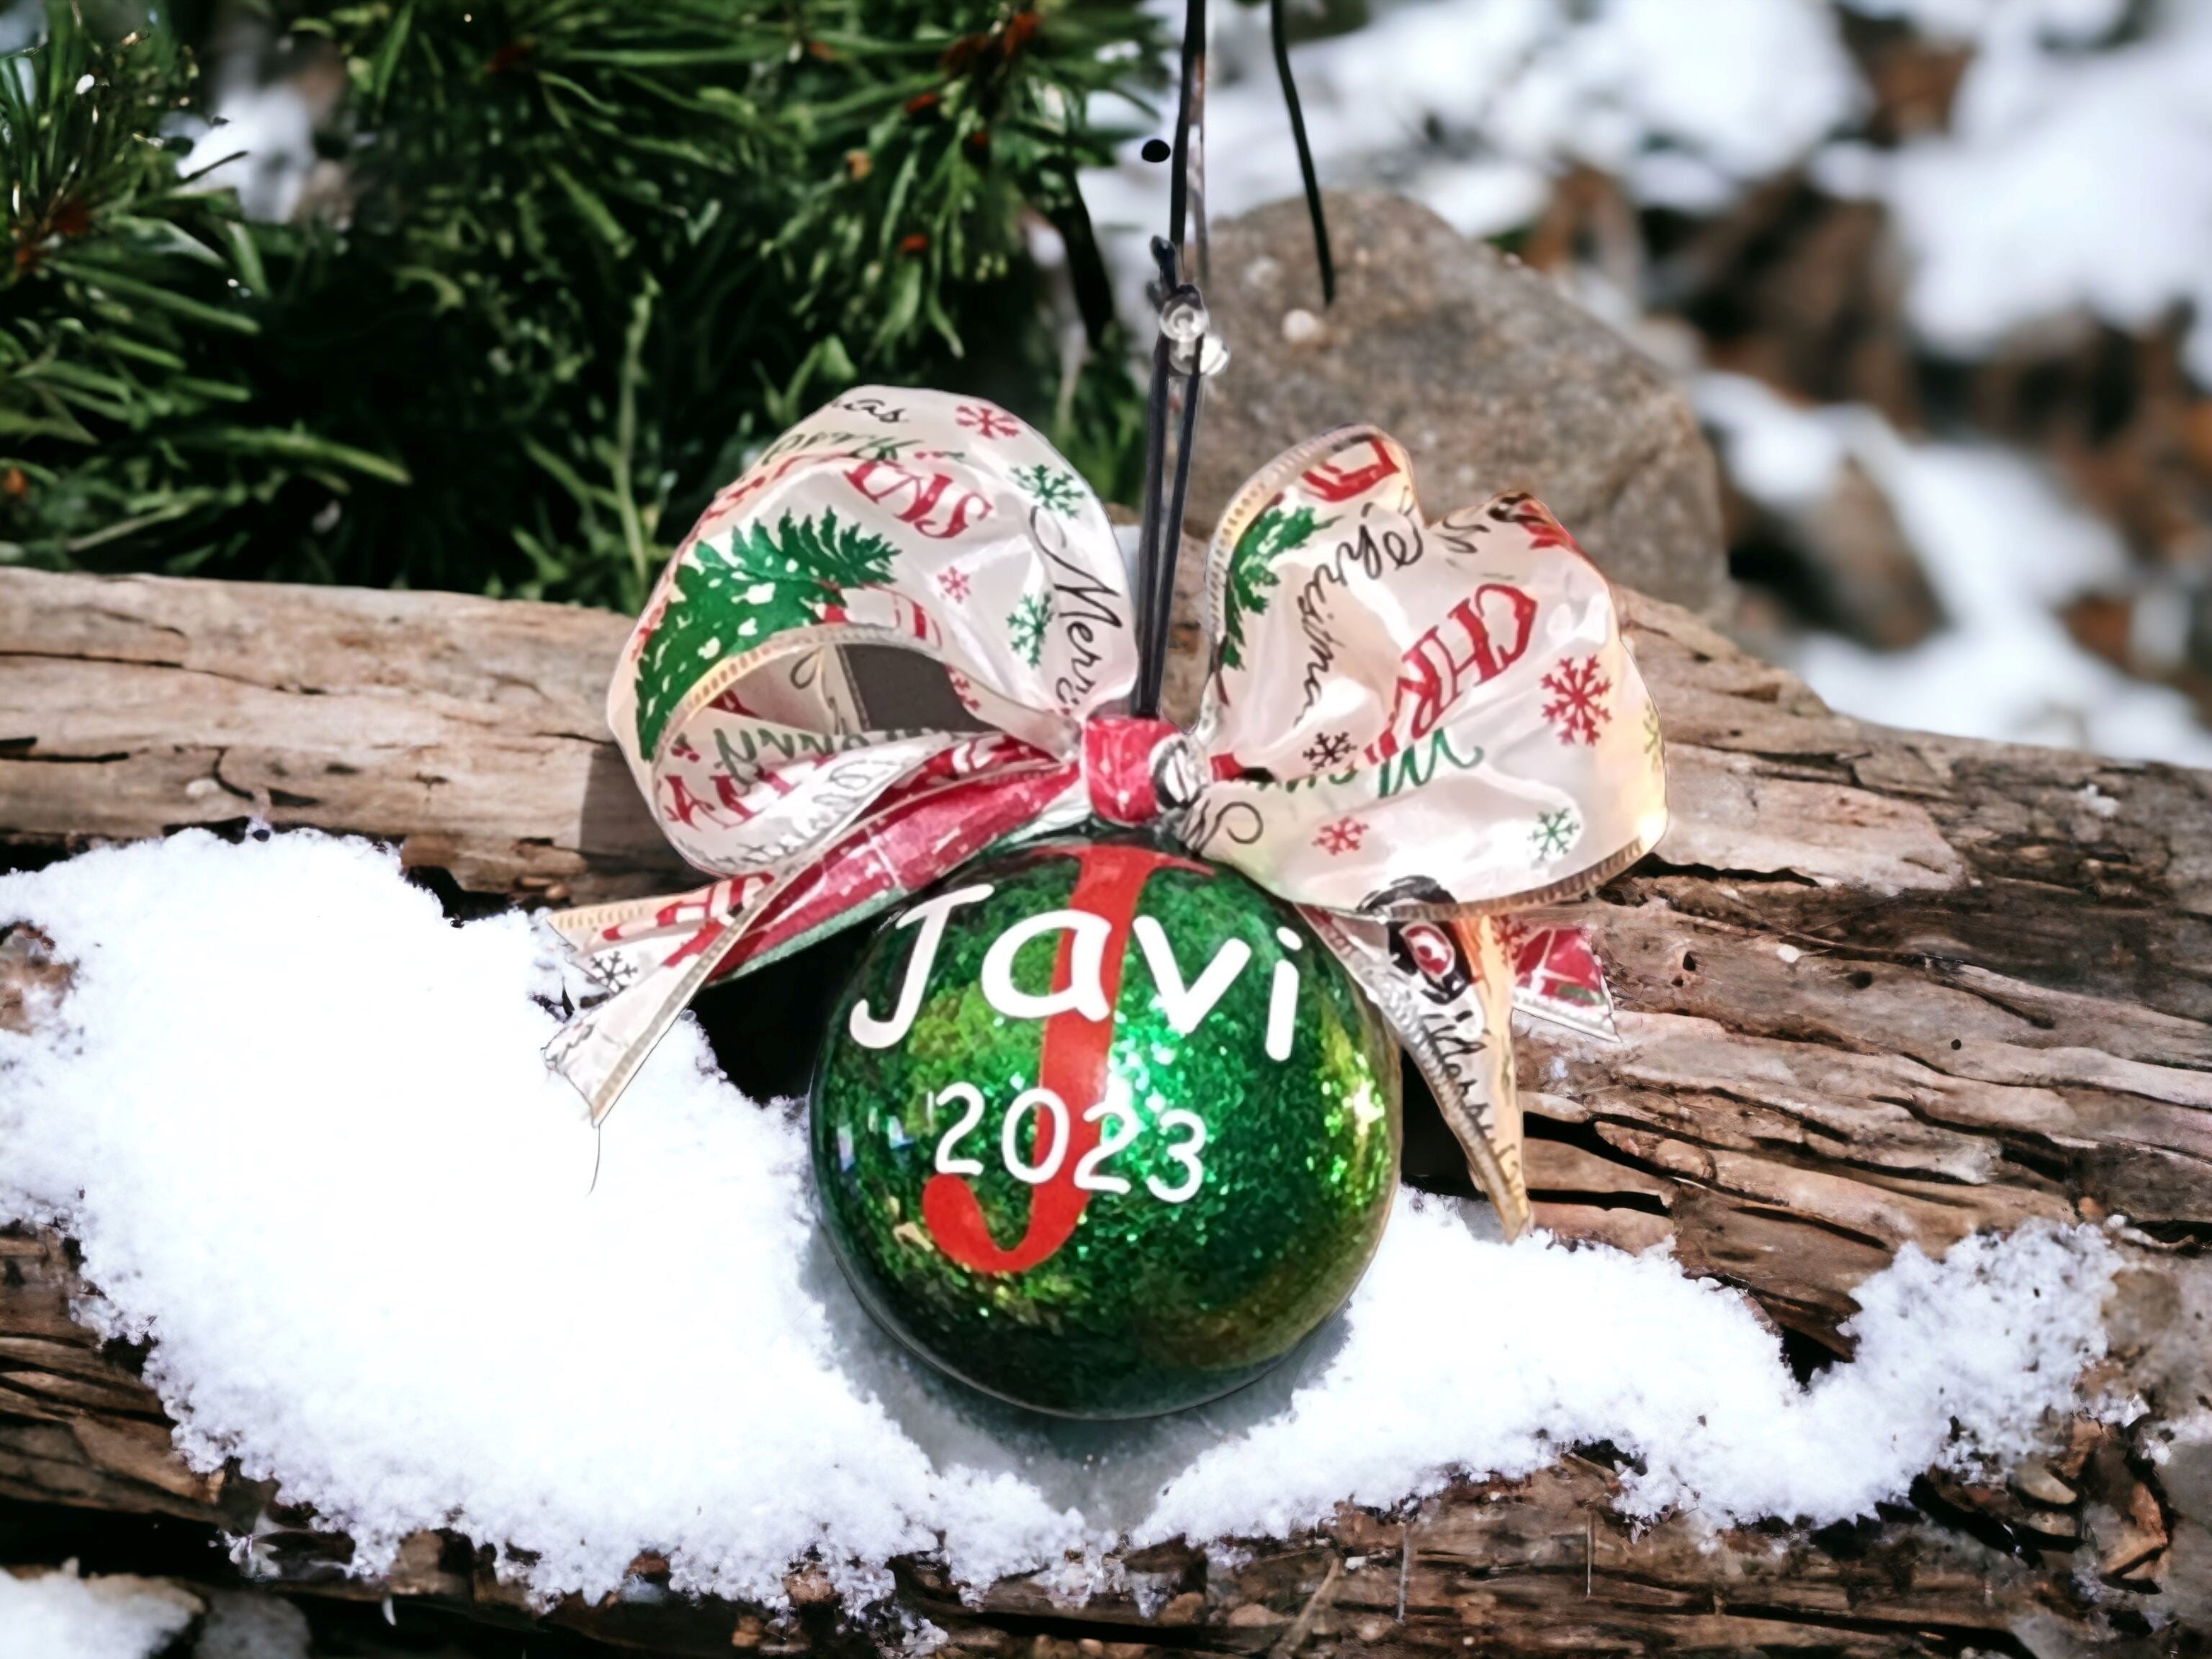 Personalized ornaments Gravesfamilycreations